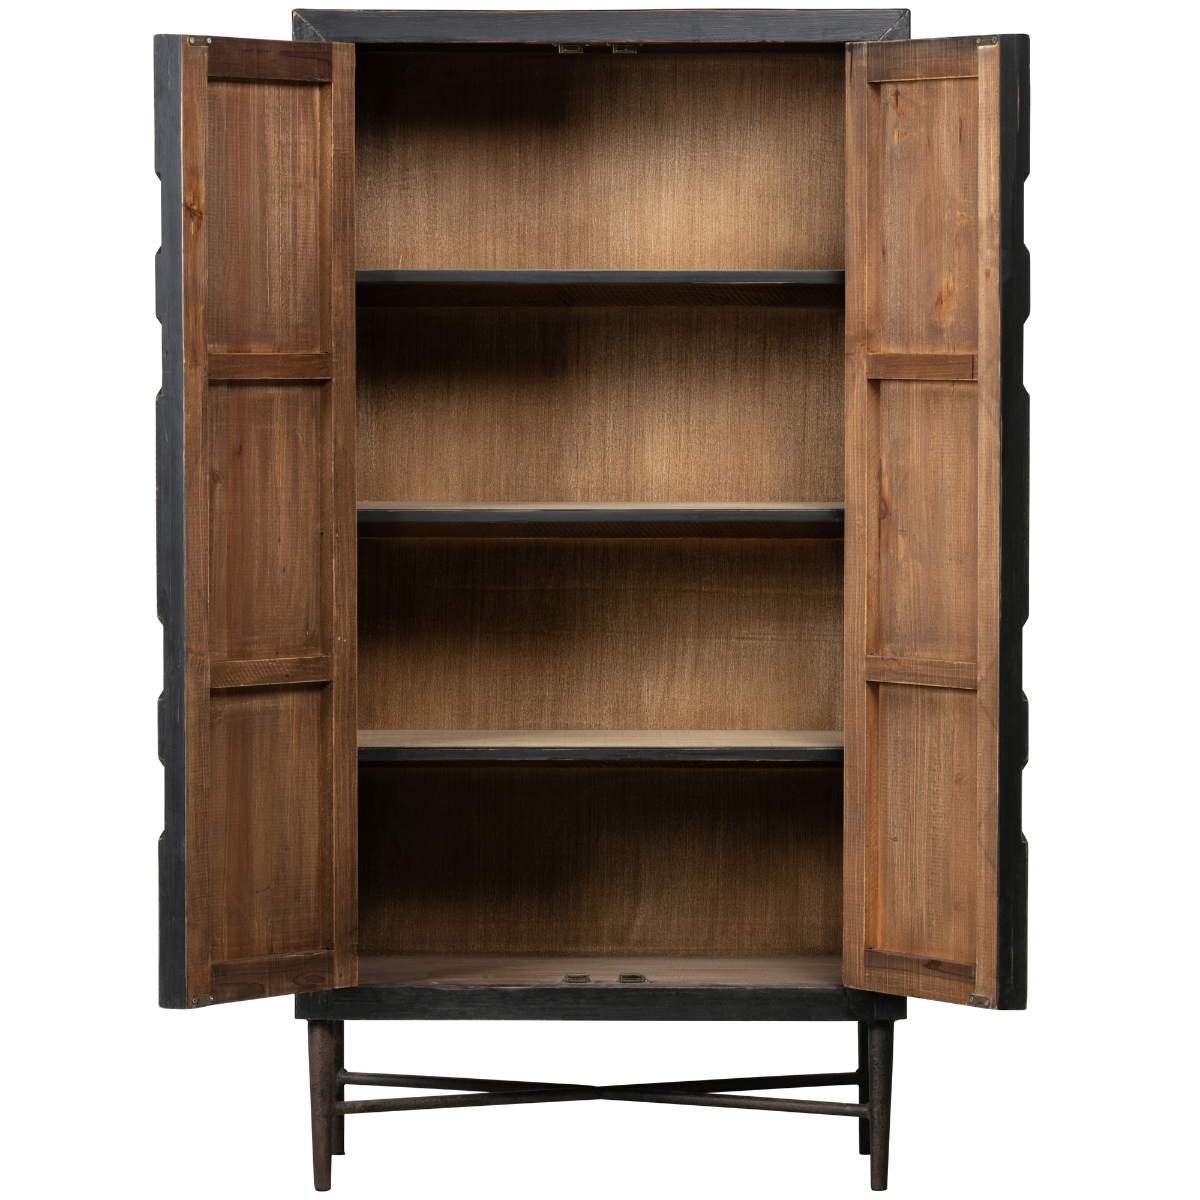 Bequest Black Wood Cabinet